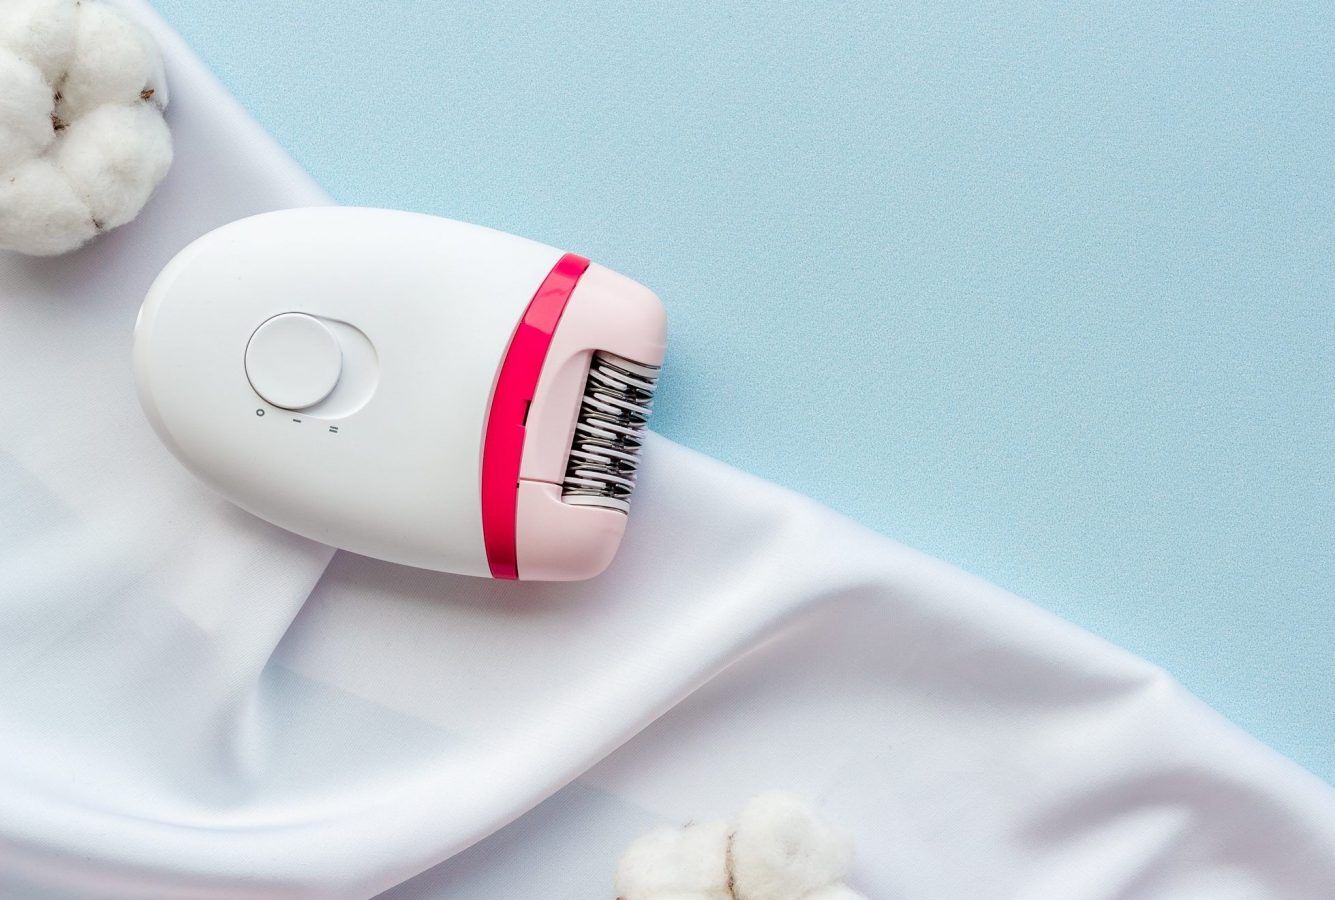 Get smooth skin with these best epilators for hair removal at home